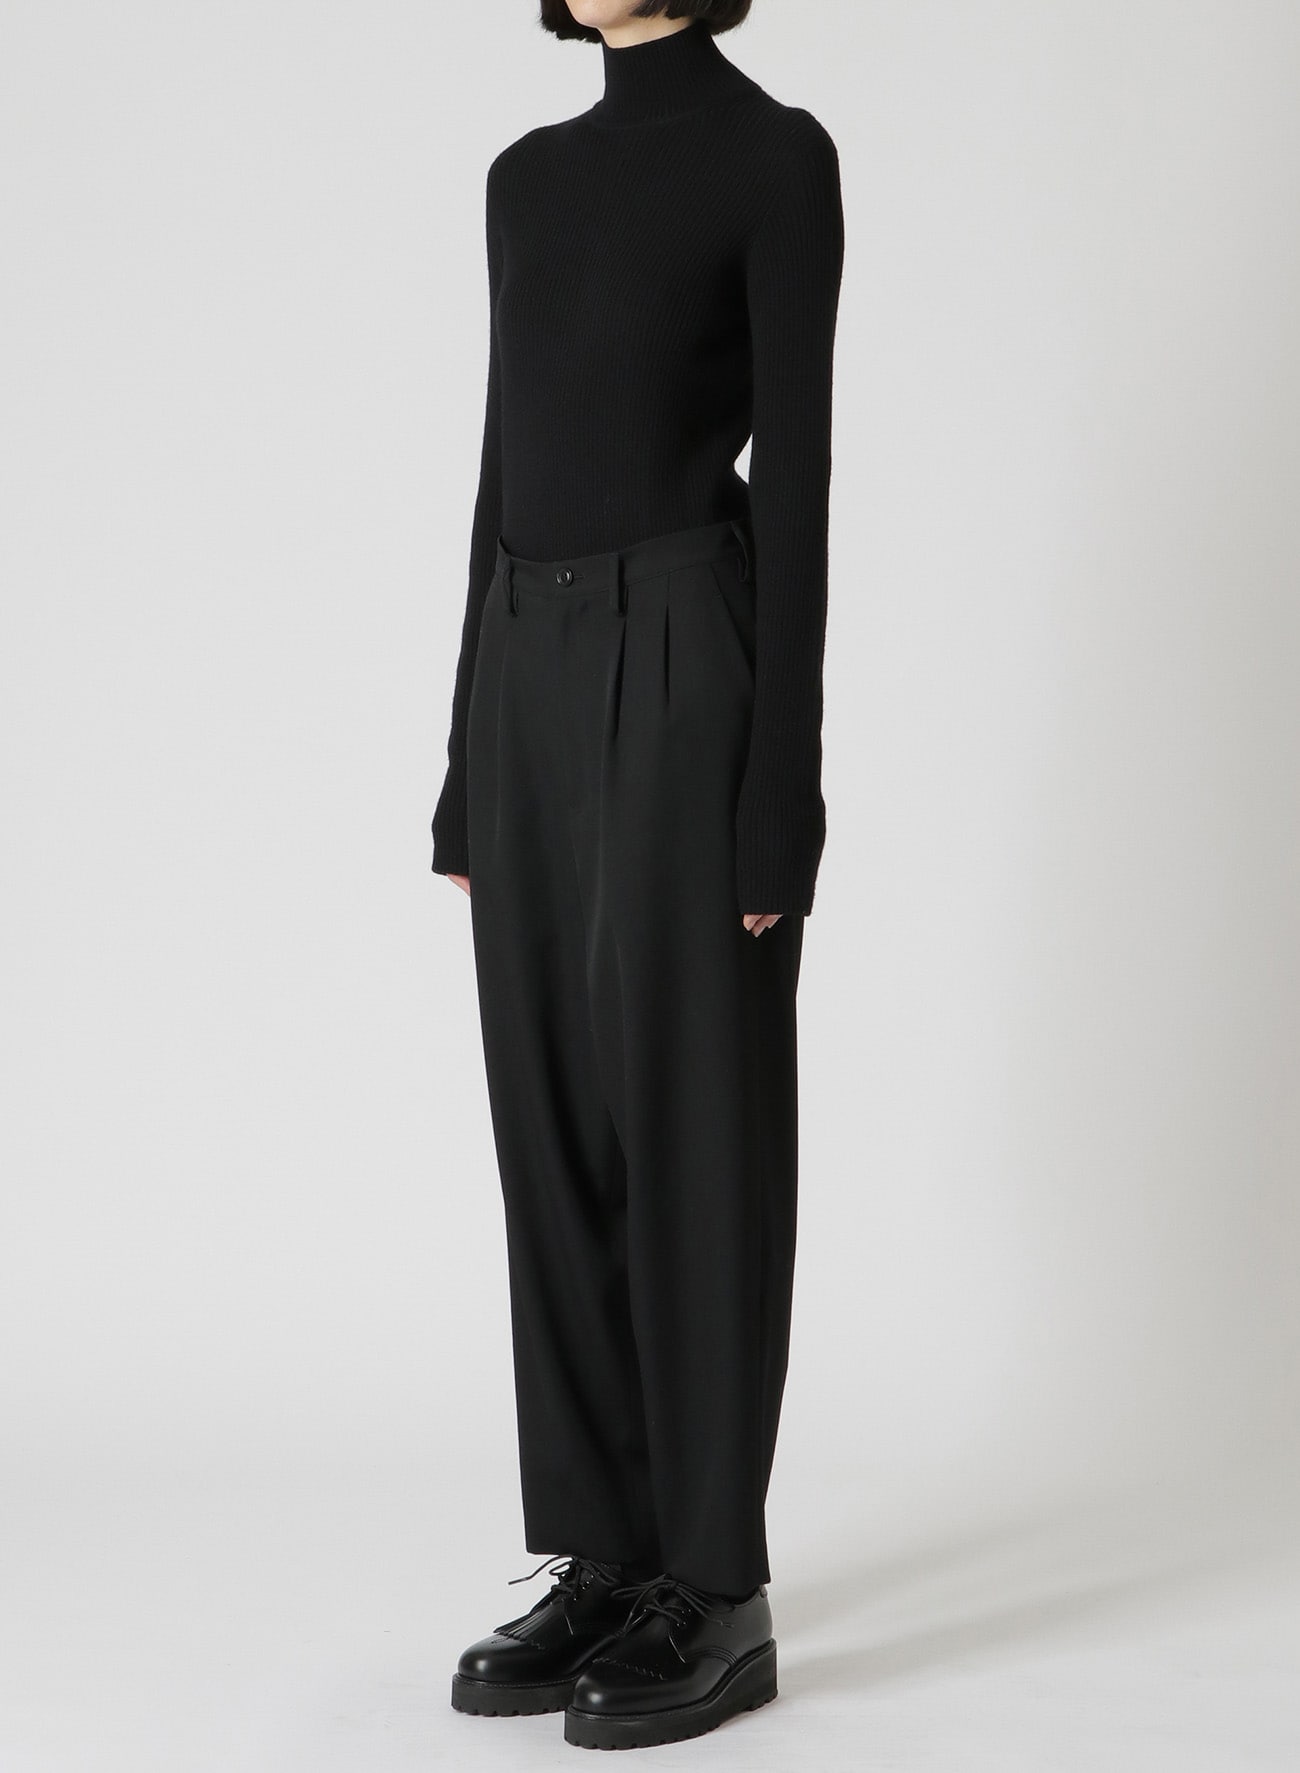 Black Cotton and Wool Double Pleat Pants SS23 25643684  Zegna CA